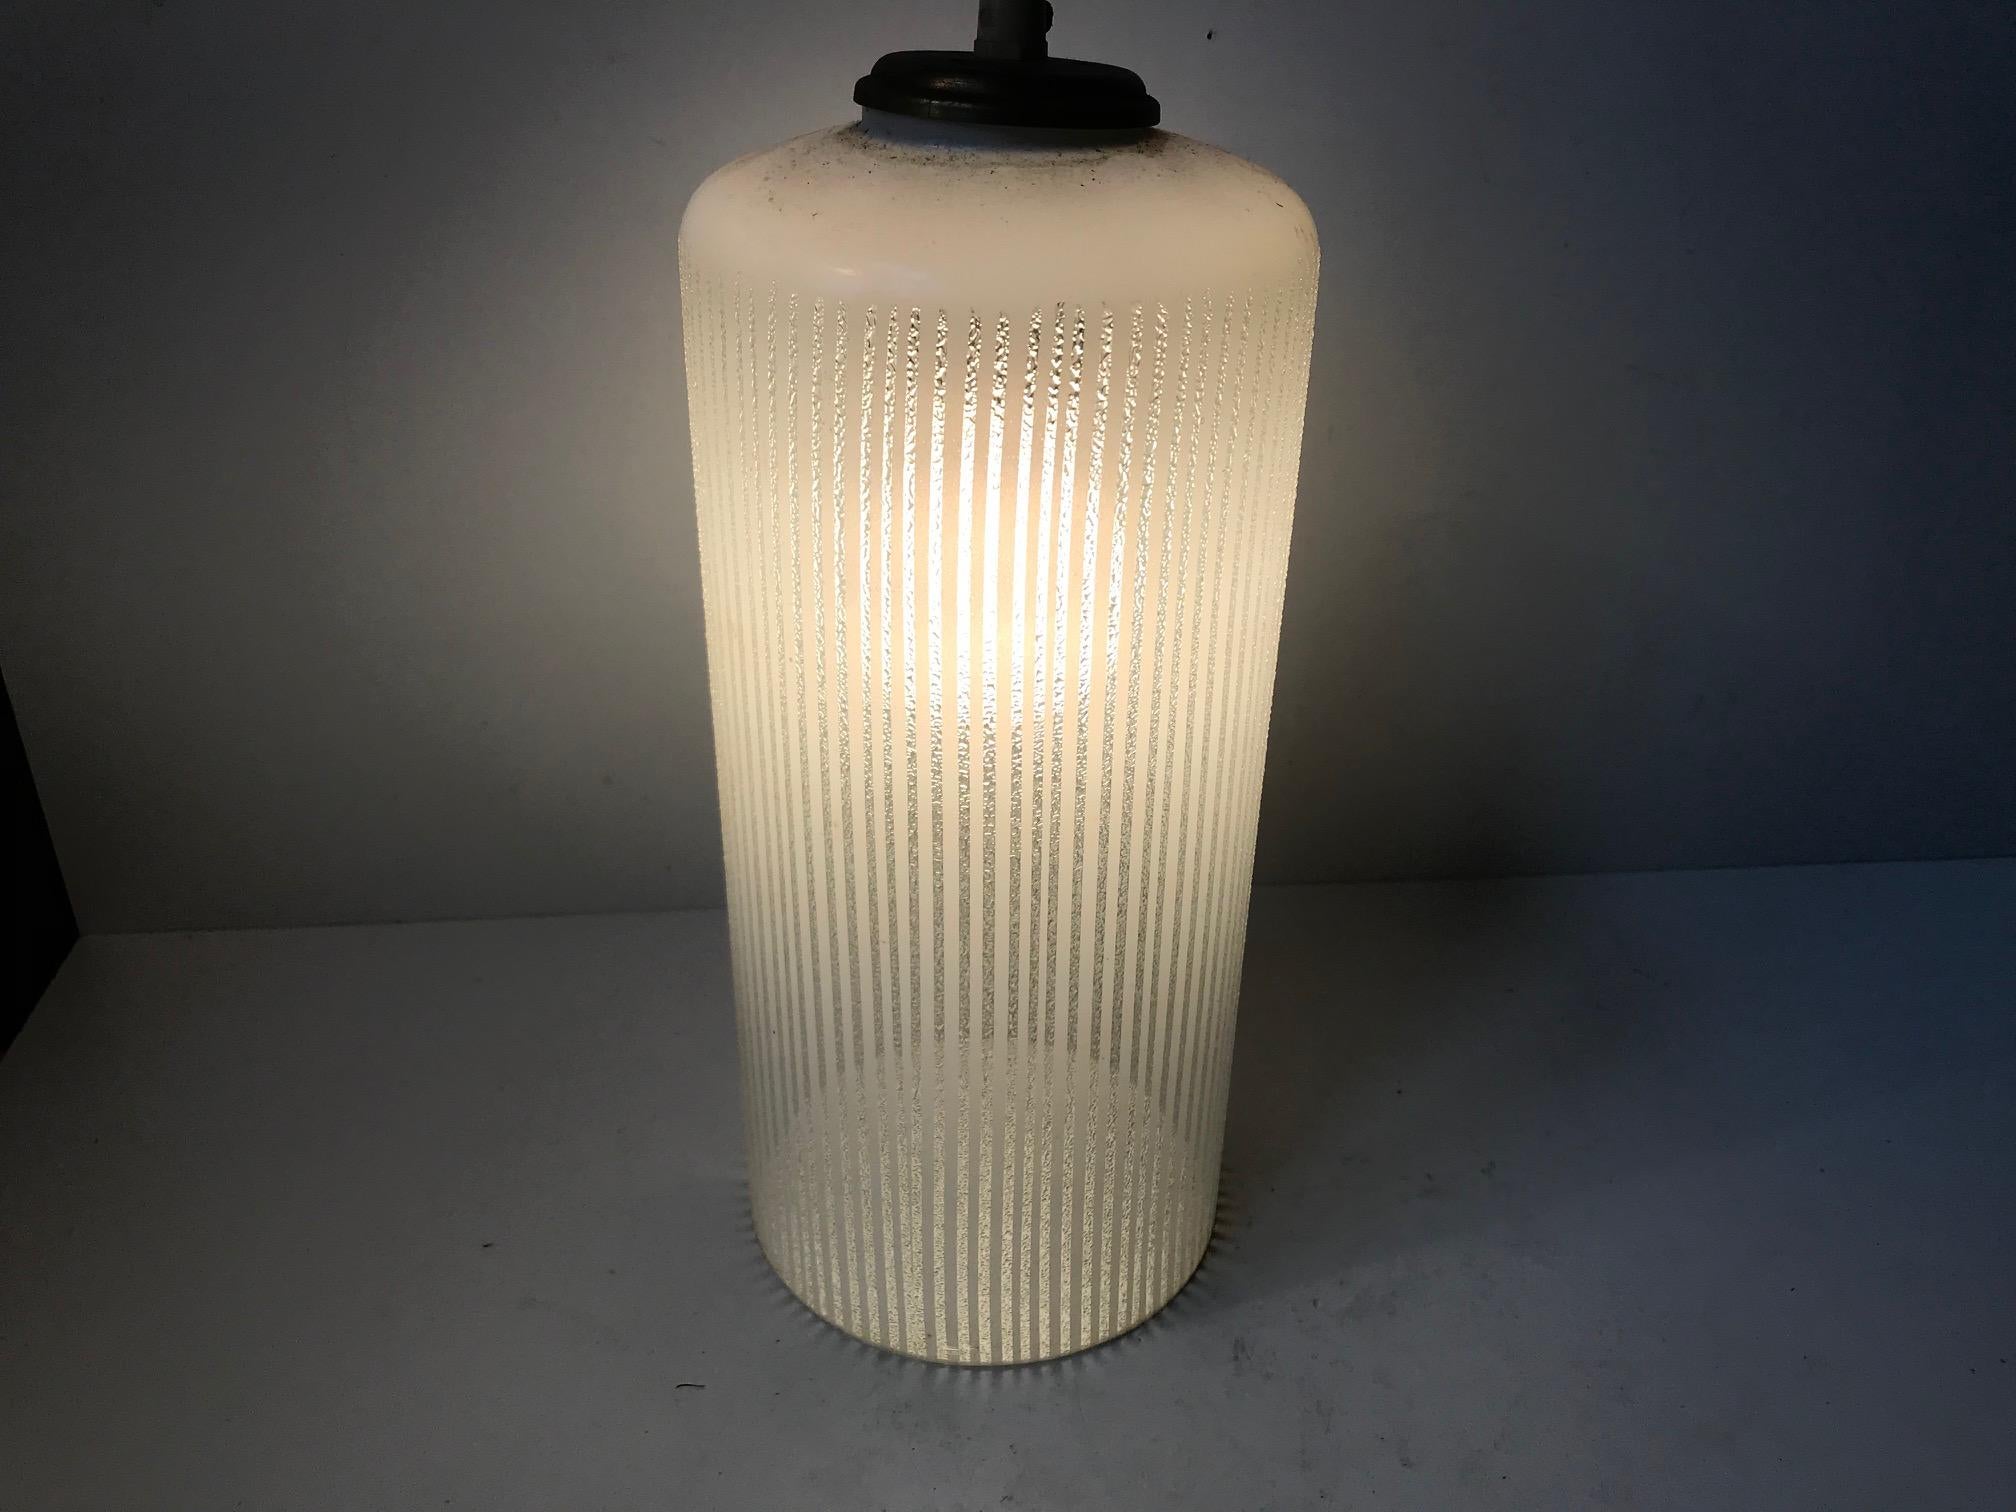 Blown Glass Vintage Danish Functionalist Pendant Light in Pinstriped Glass from Voss, 1950s